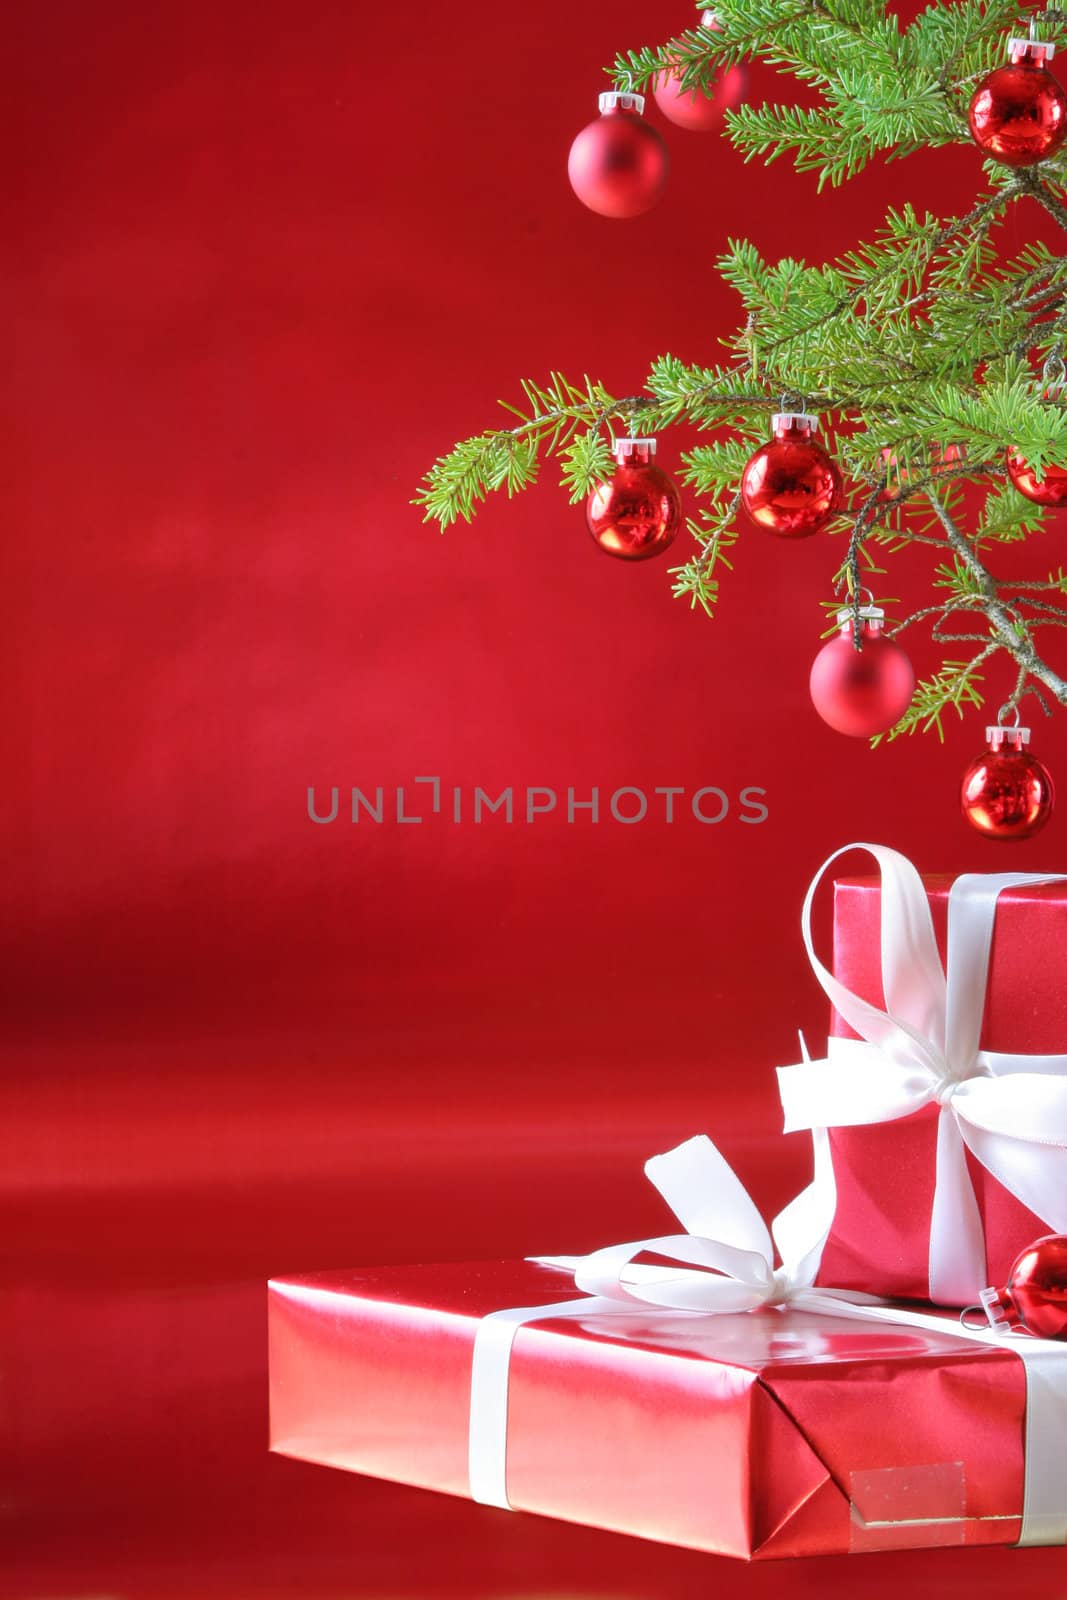 Elegant red presents under Christmas tree with deep rich red background.